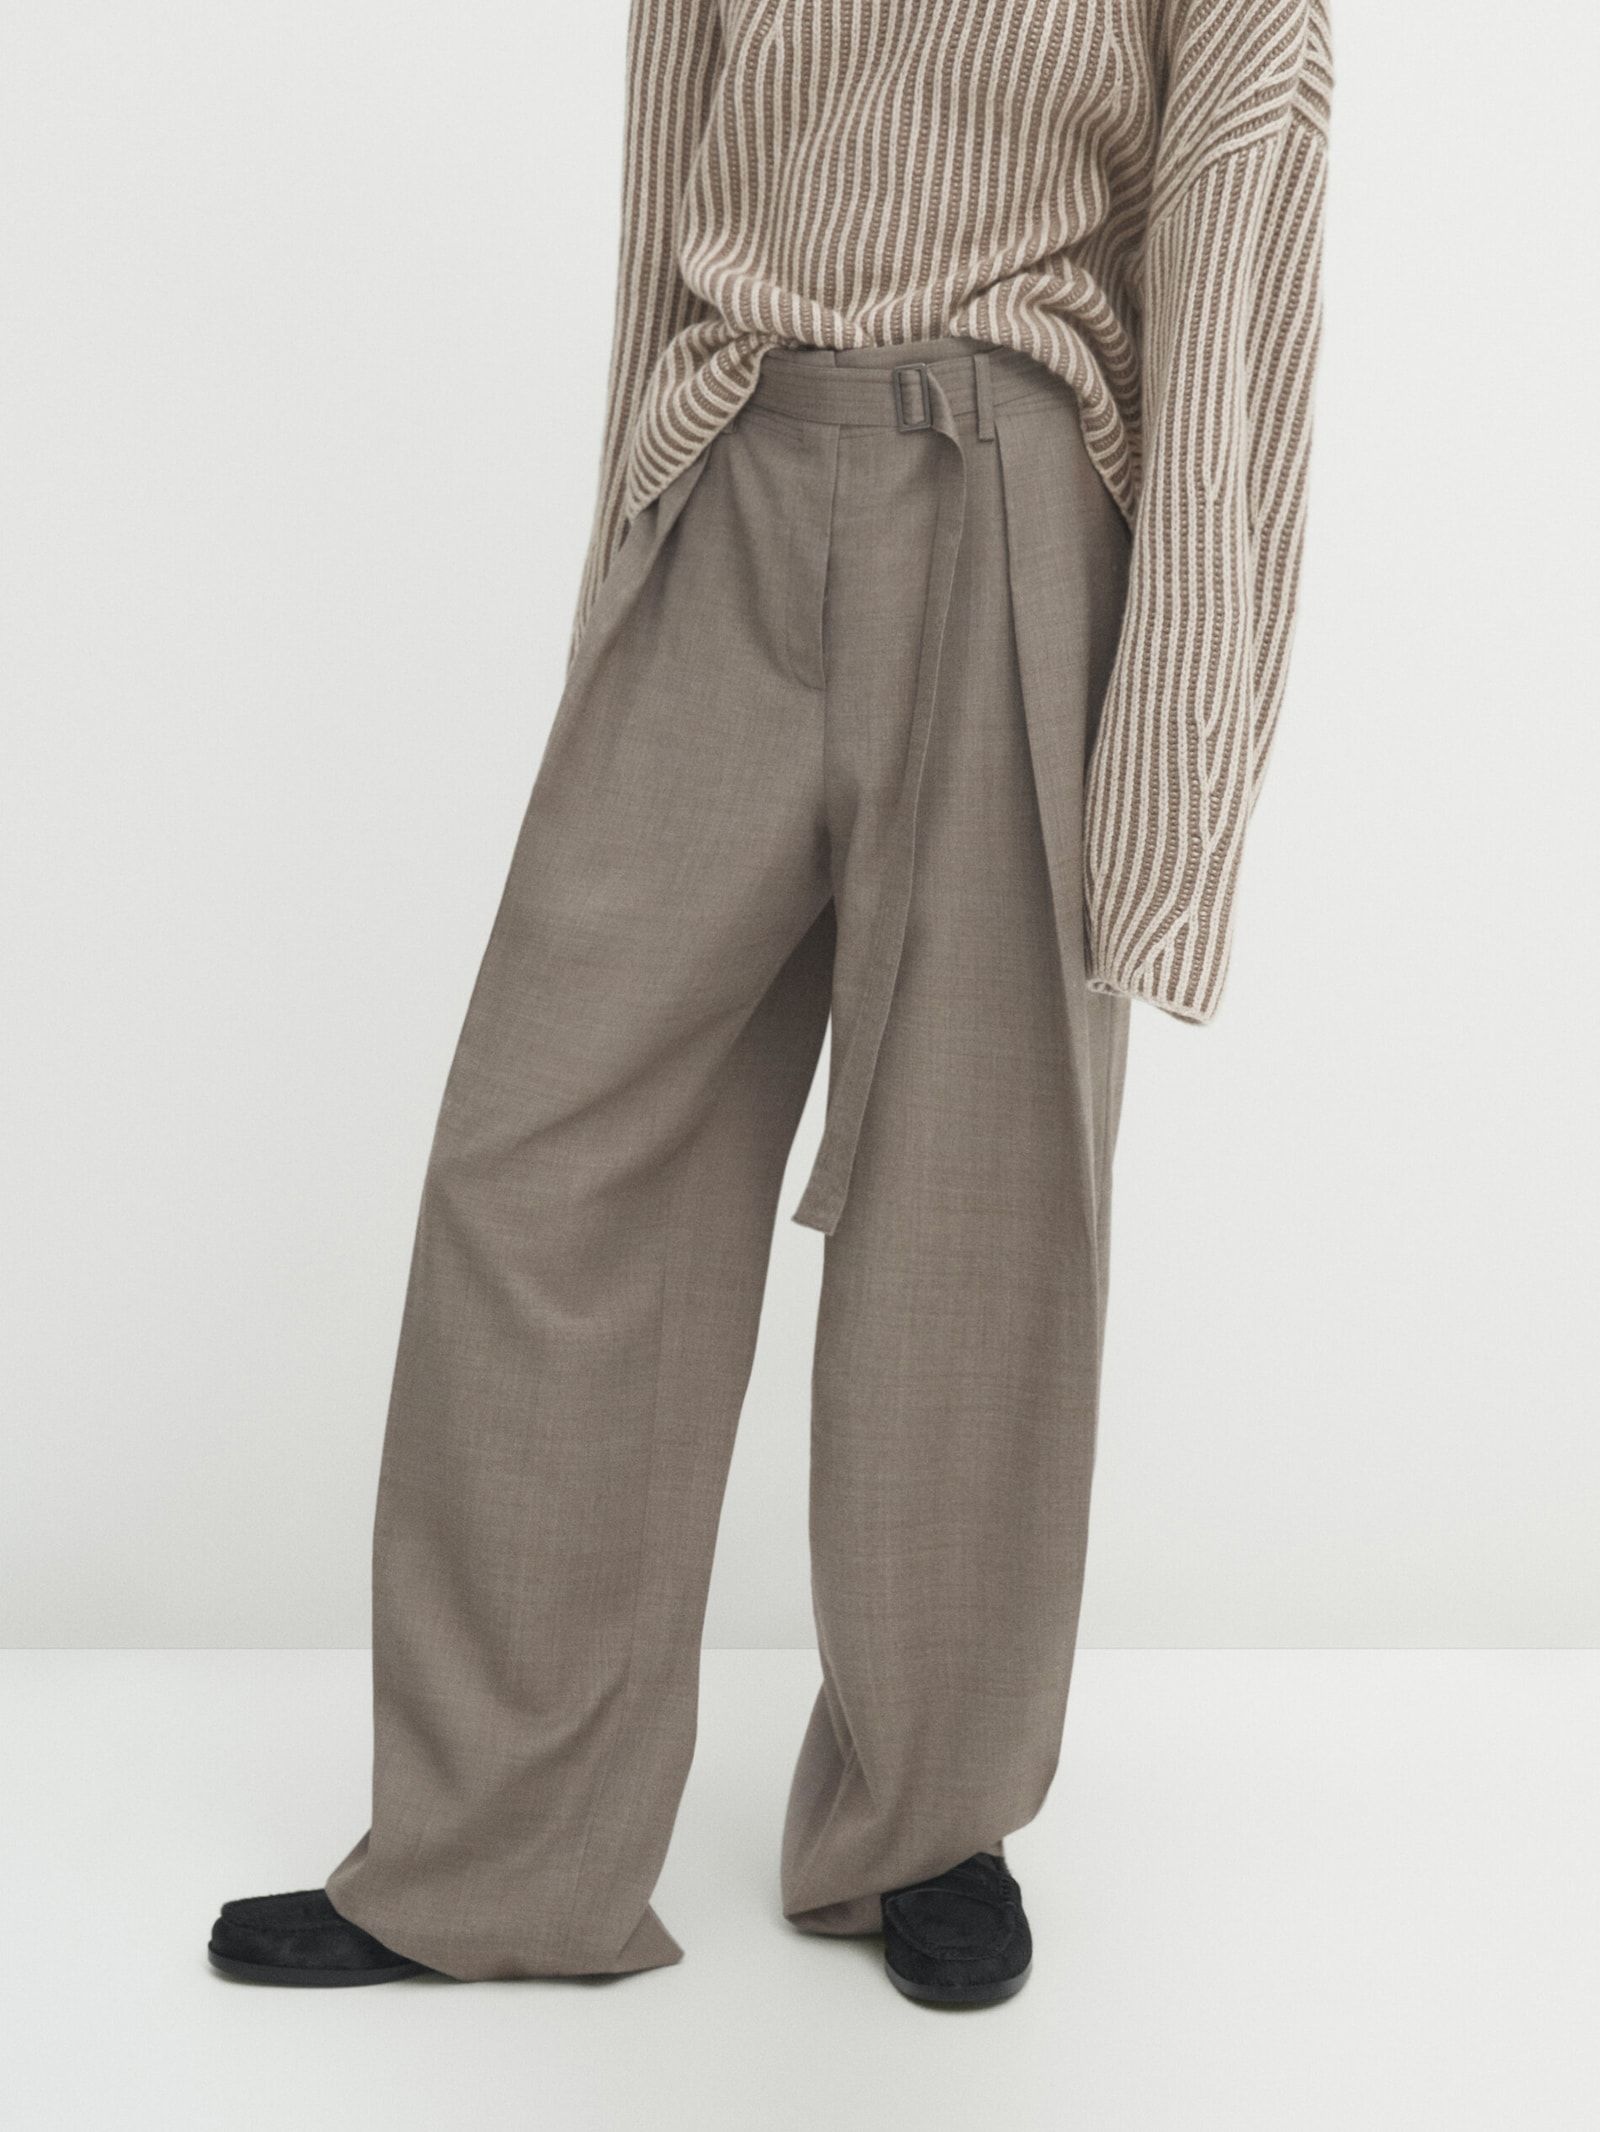 Flannel trousers with darts and belt | Massimo Dutti UK